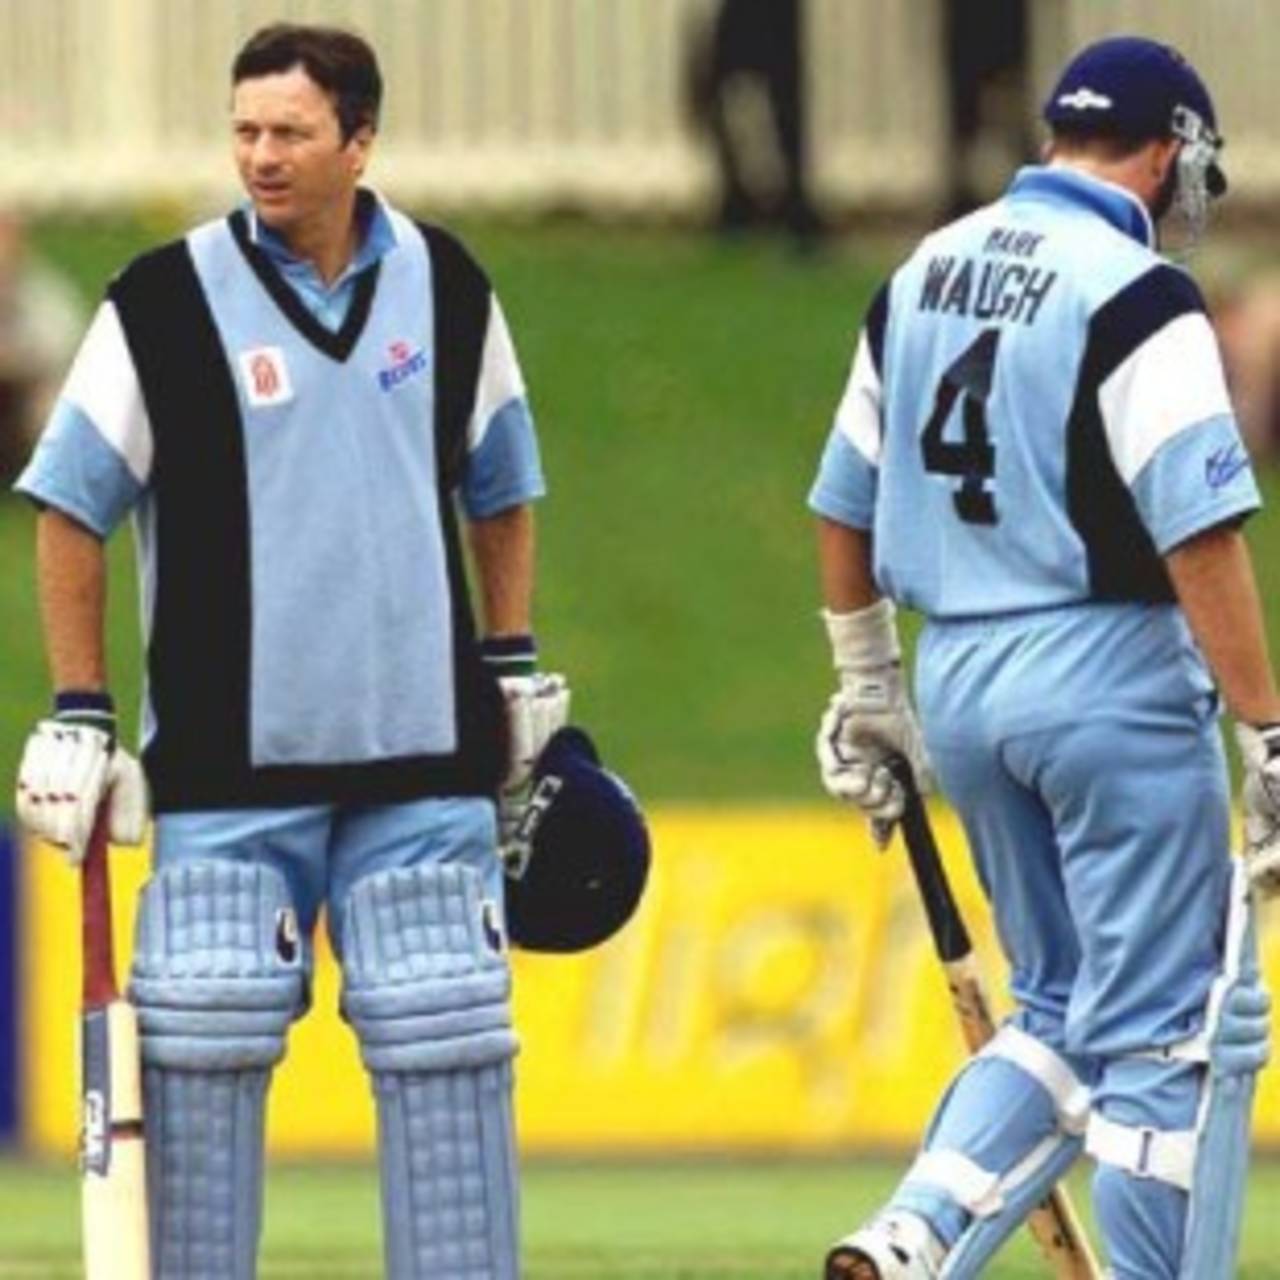 Before the Waugh brothers became certainties in the Australian side, their days with New South Wales were a long, public selection trial, with Dean Jones (Victoria) and Damien Martyn (Western Australia) for added competition&nbsp;&nbsp;&bull;&nbsp;&nbsp;Sean Garnsworthy/Getty Images